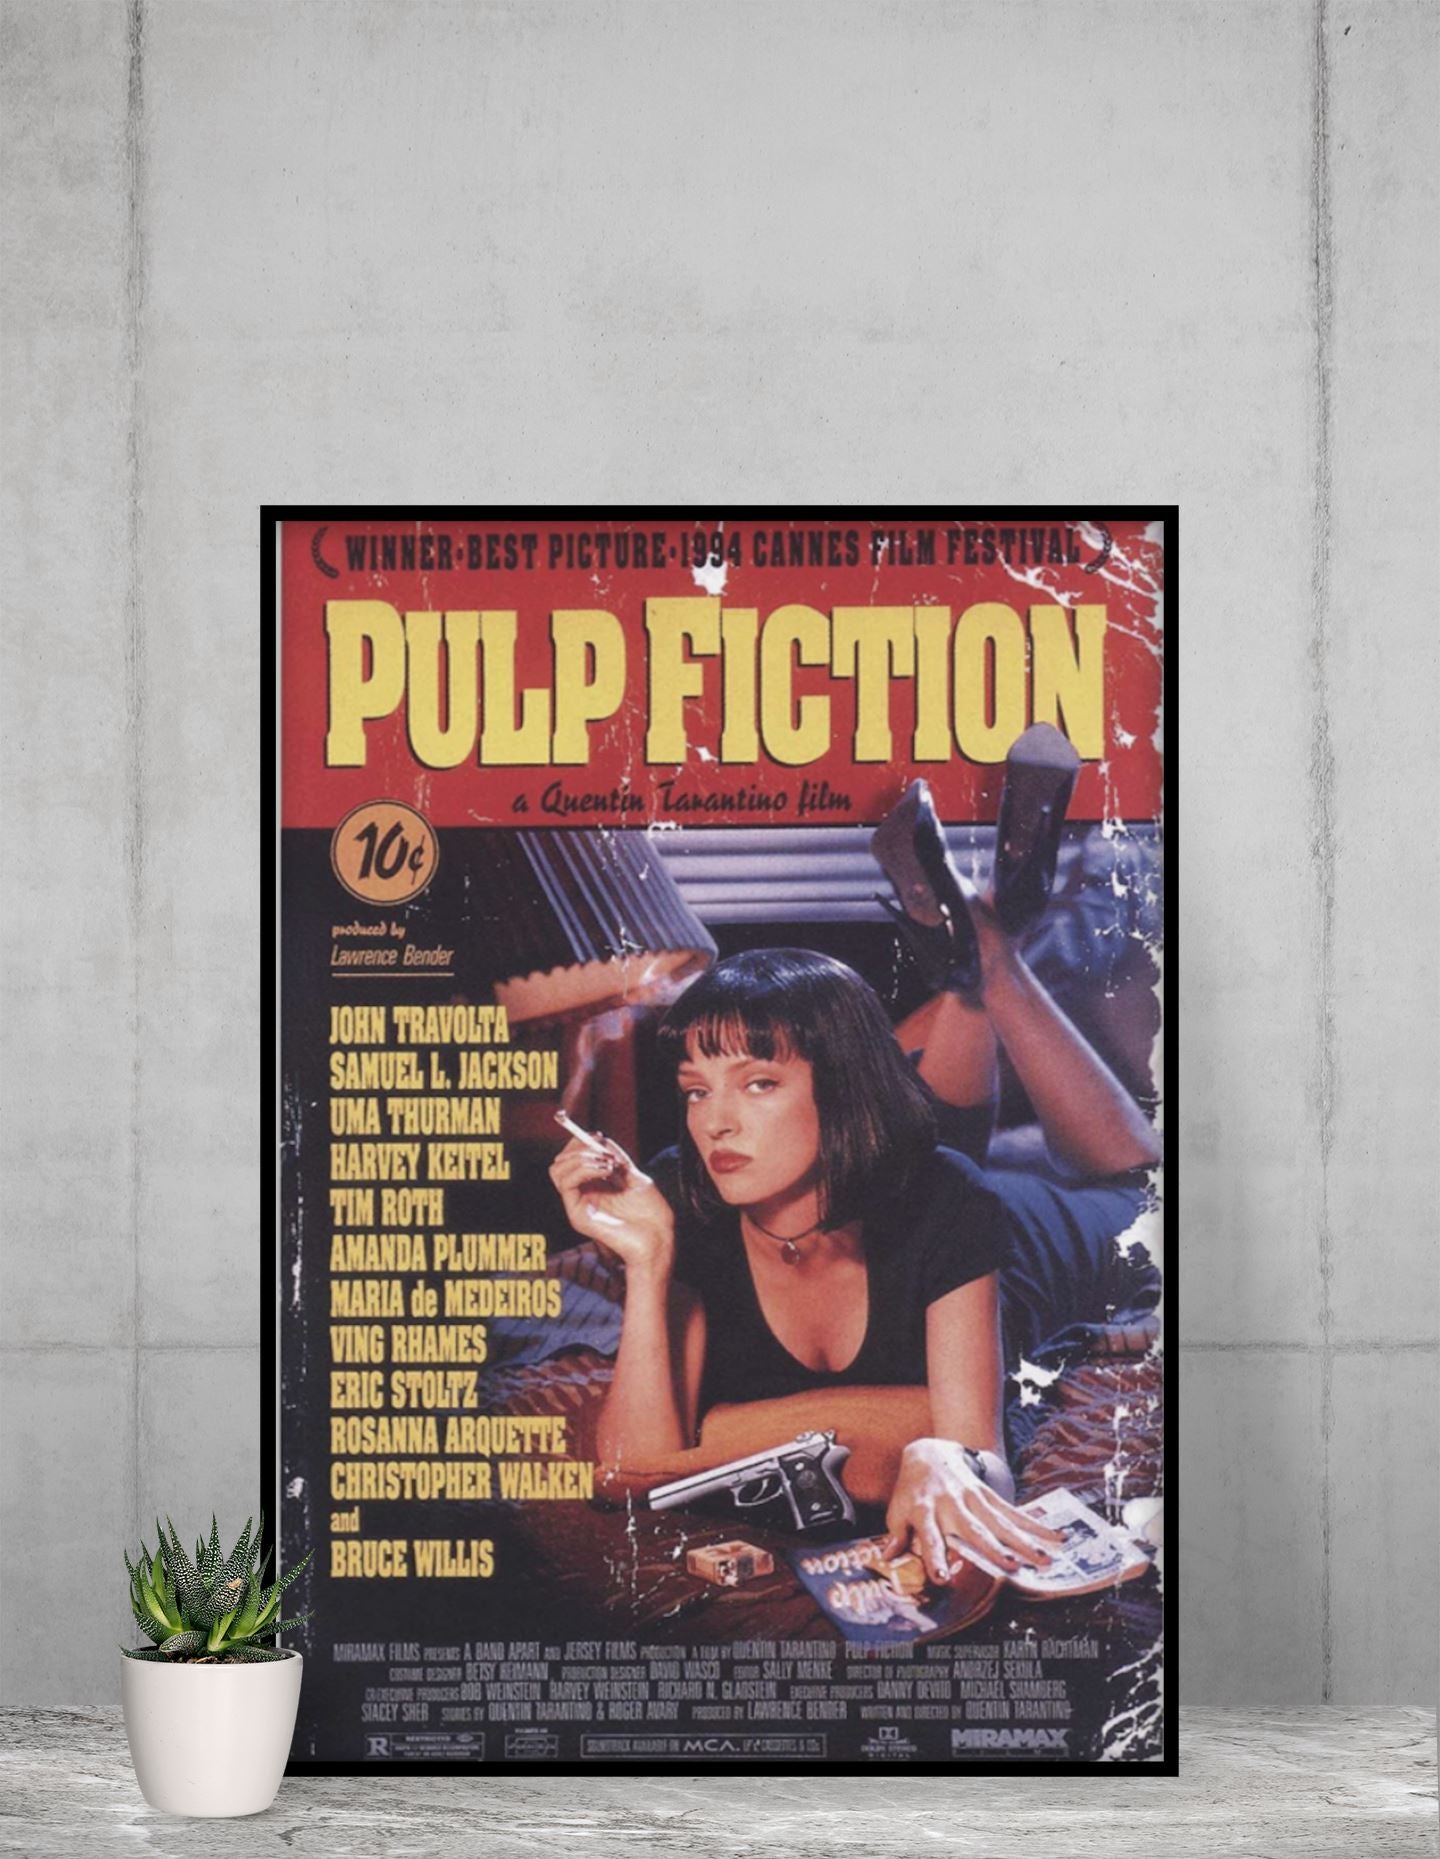 Pulp Fiction Iconic Cover's Framed Wall Poster Printrove 